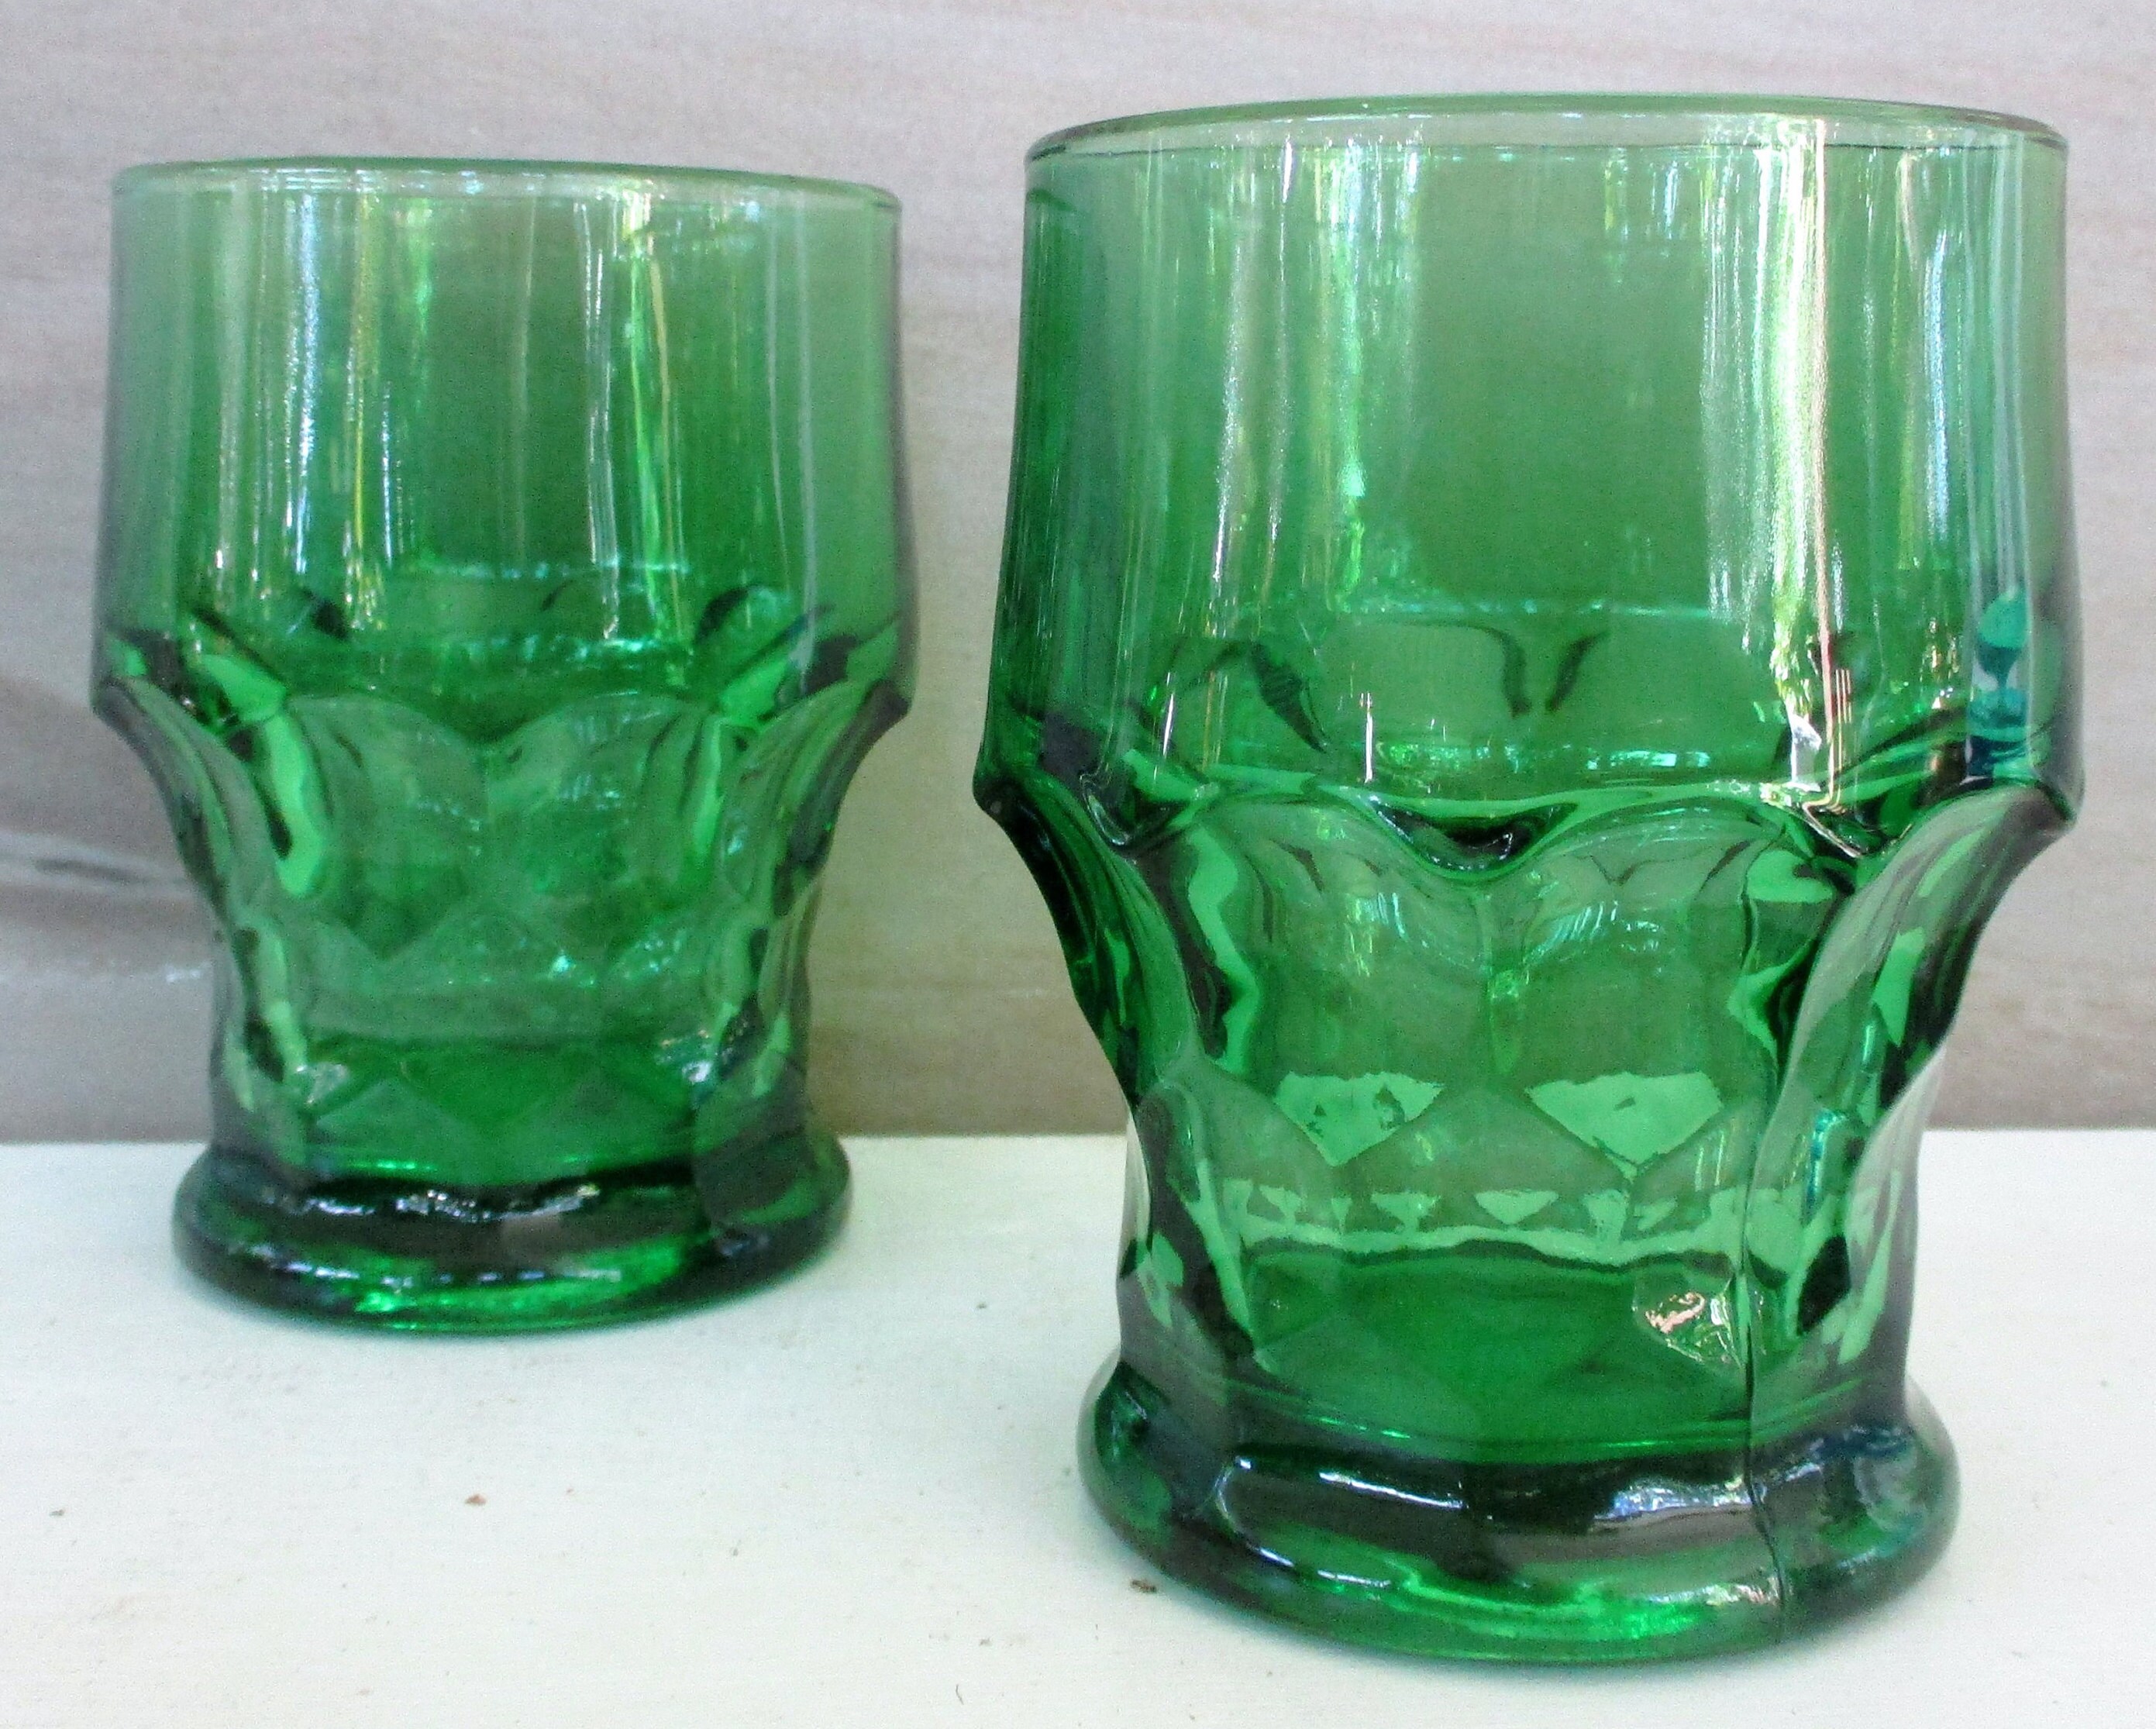 TWIN - 8oz Upcycled Glass Cups (Set of 6) - Green Tinted – DoneGood